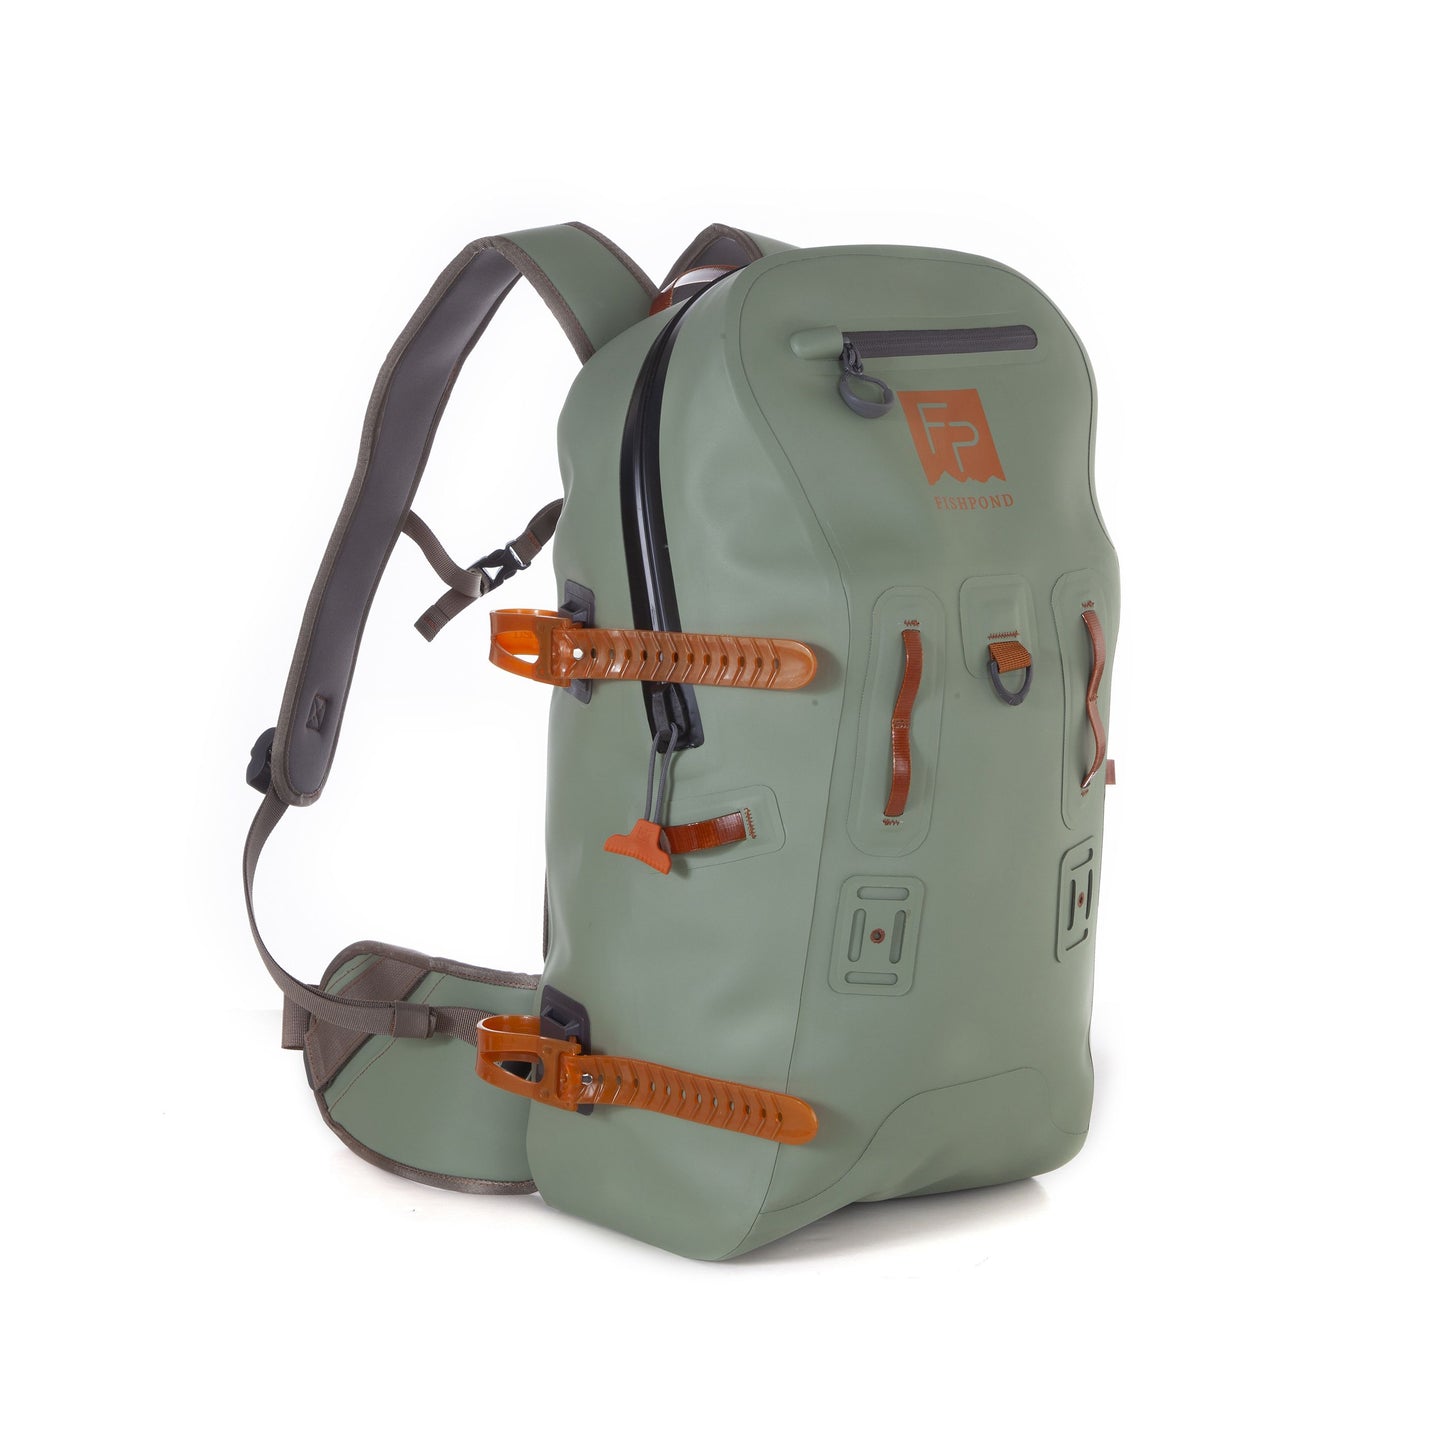 Fishpond Thunderhead Submersible Lumbar Pack Eco, Fishpond Waterproof Packs, The Fly Fishers Fly Shop